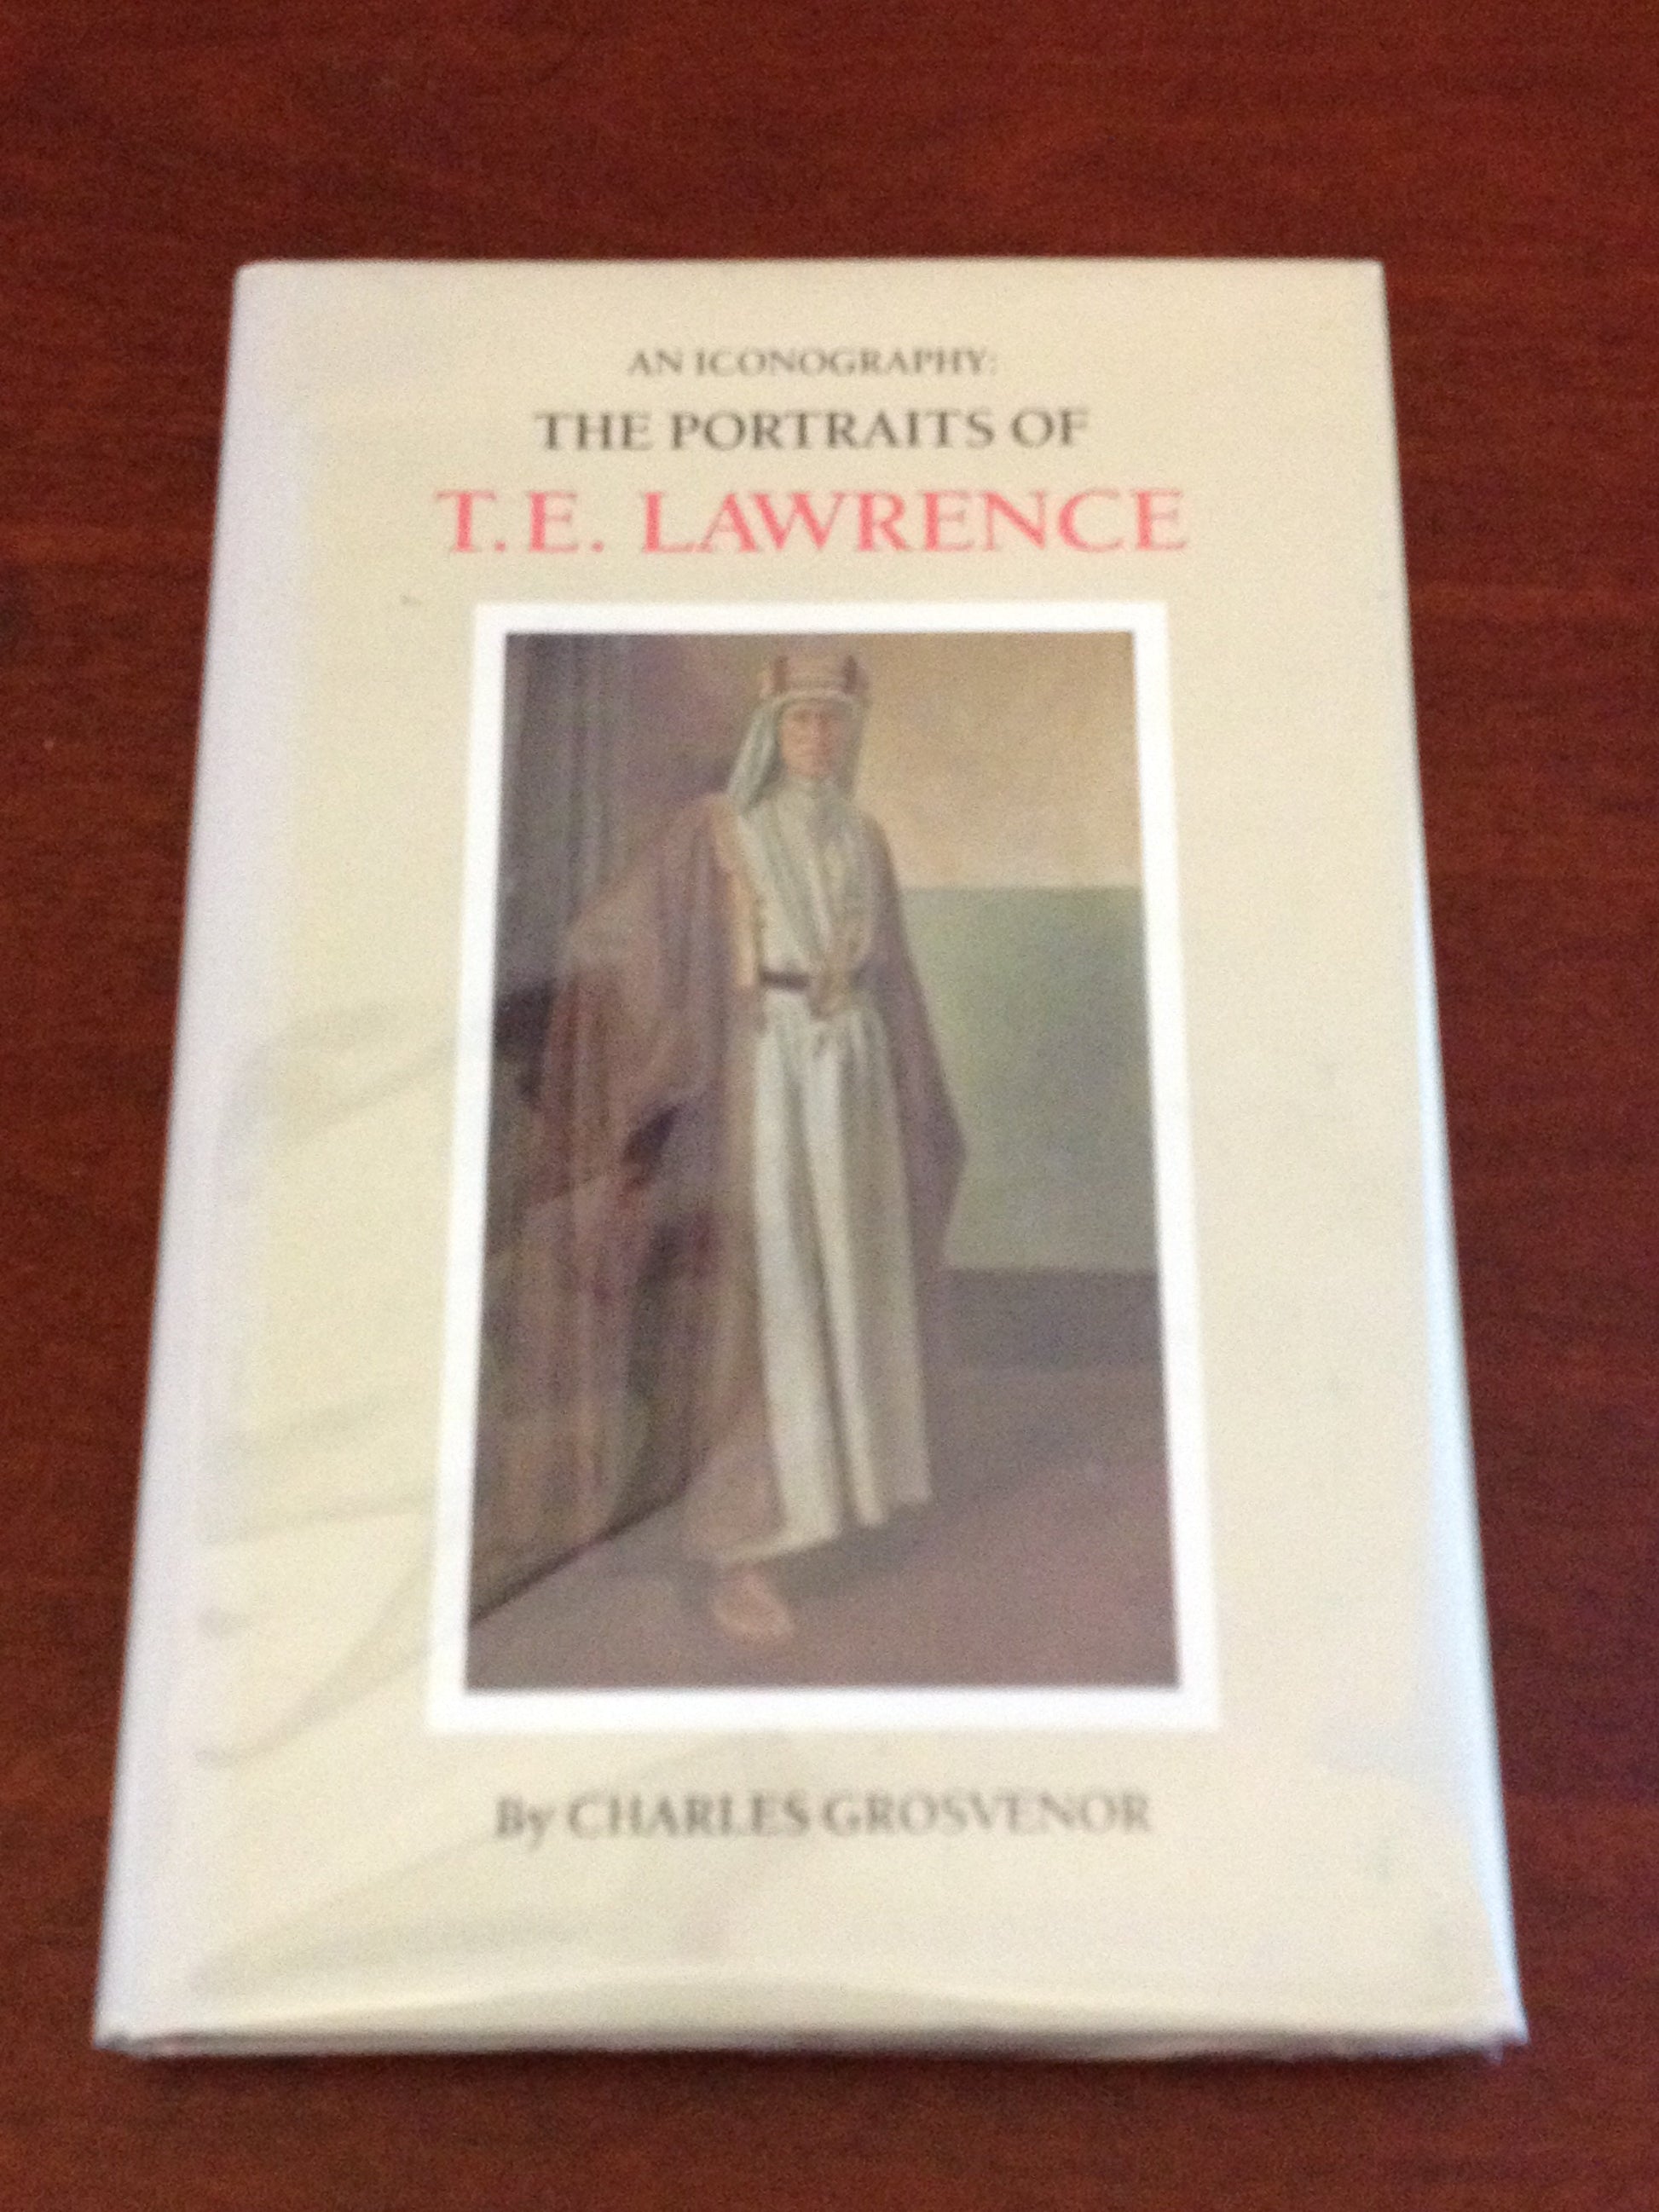 AN ICONOGRAPHY; PORTRAITS OF TE LAWRENCE BY: CHARLES GROSVENOR BooksCardsNBikes